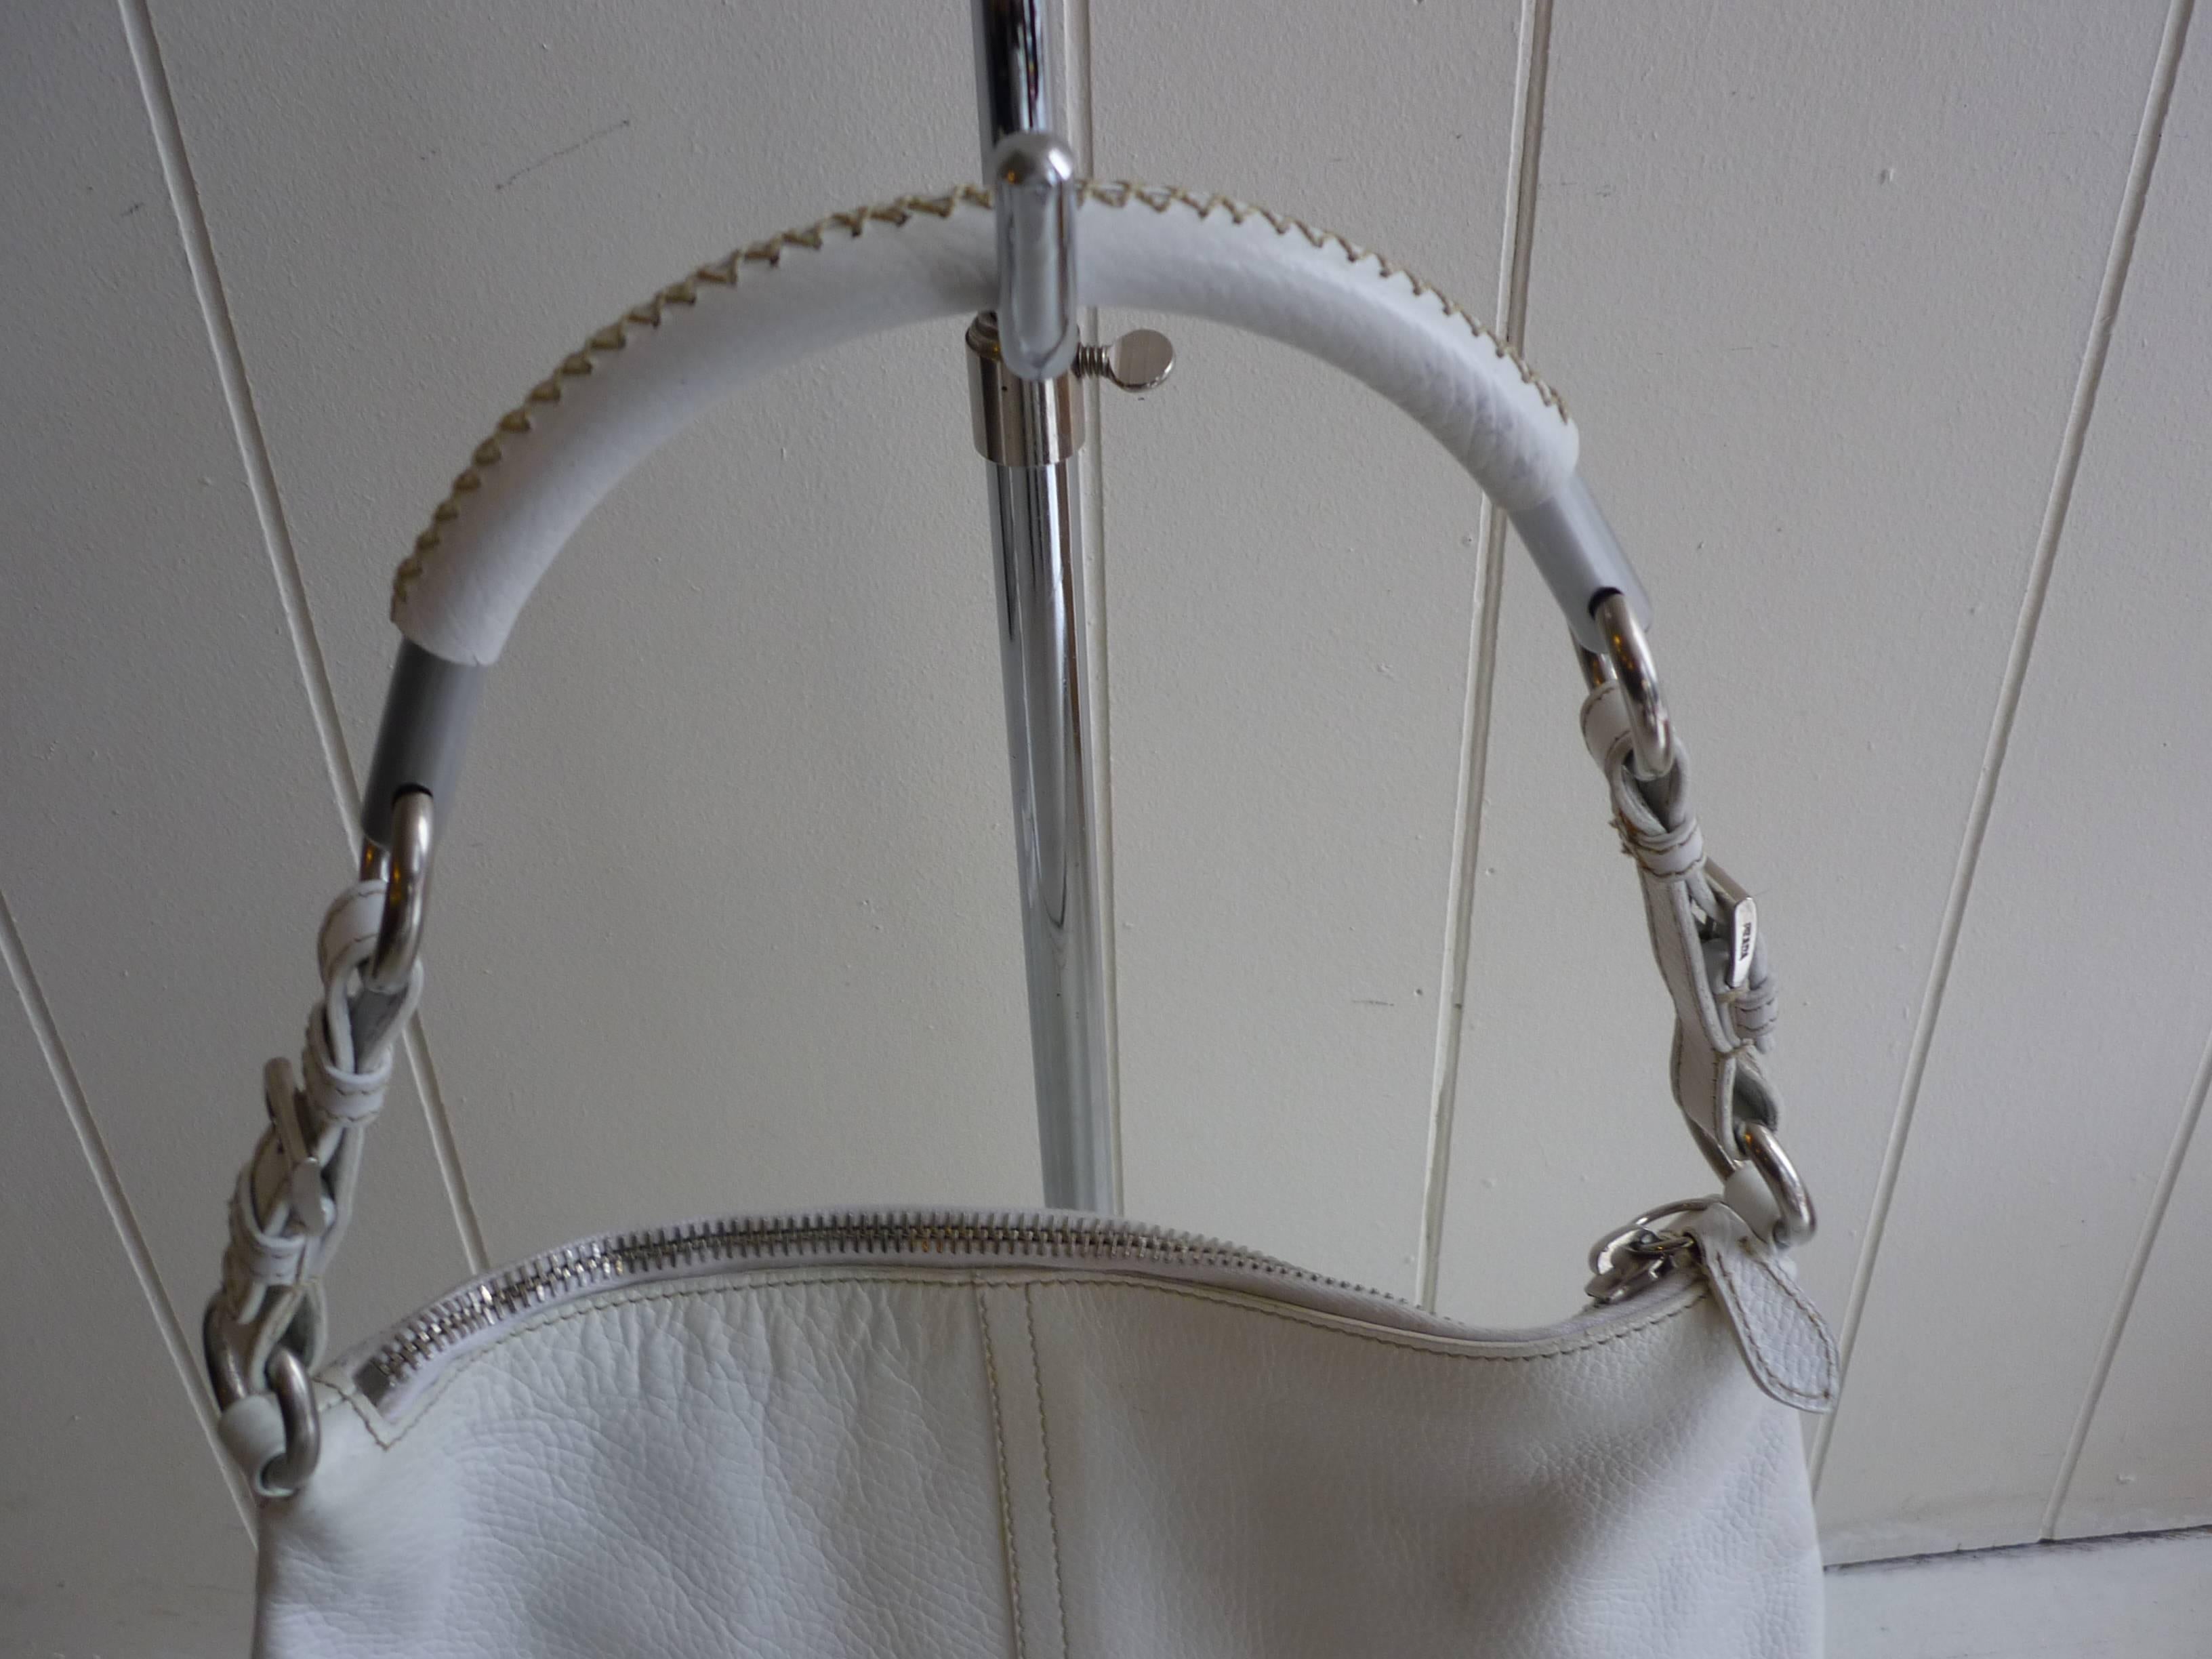 Very nice soft sided bag with a metal leather covered semi-ring handle which is connected to a 